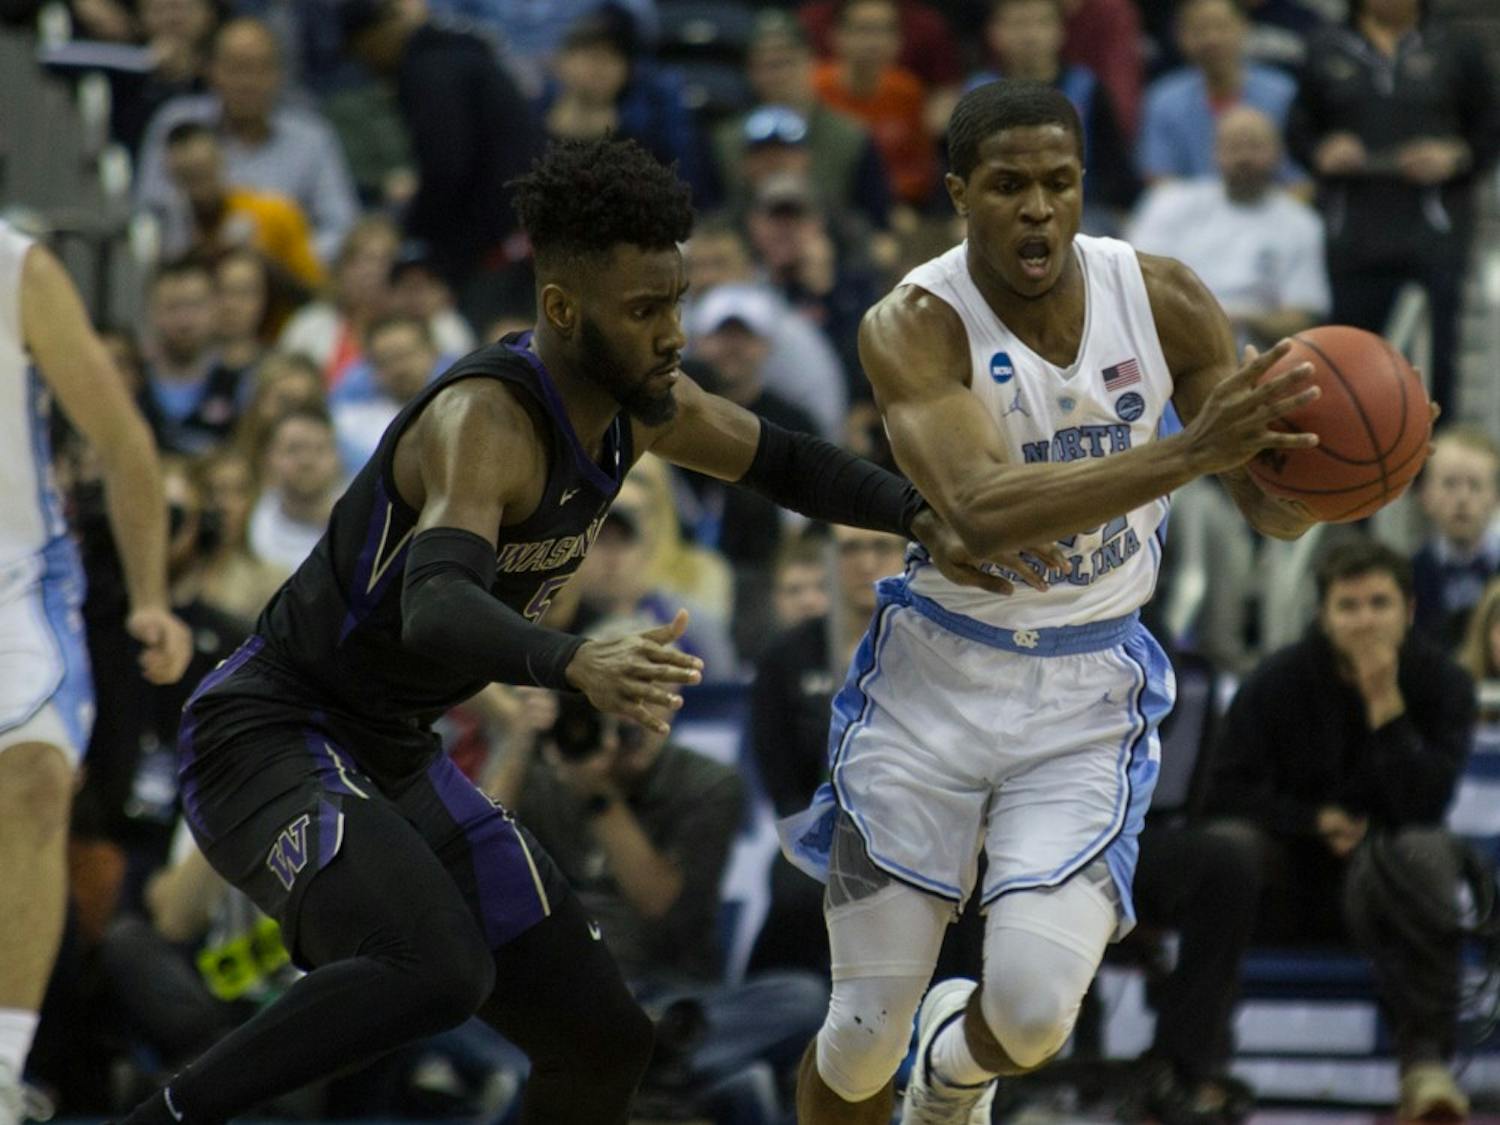 UNC defeated Washington 81-59 in the second round of the NCAA tournament at Nationwide Arena in Columbus, OH on Sunday, March 24, 2019.